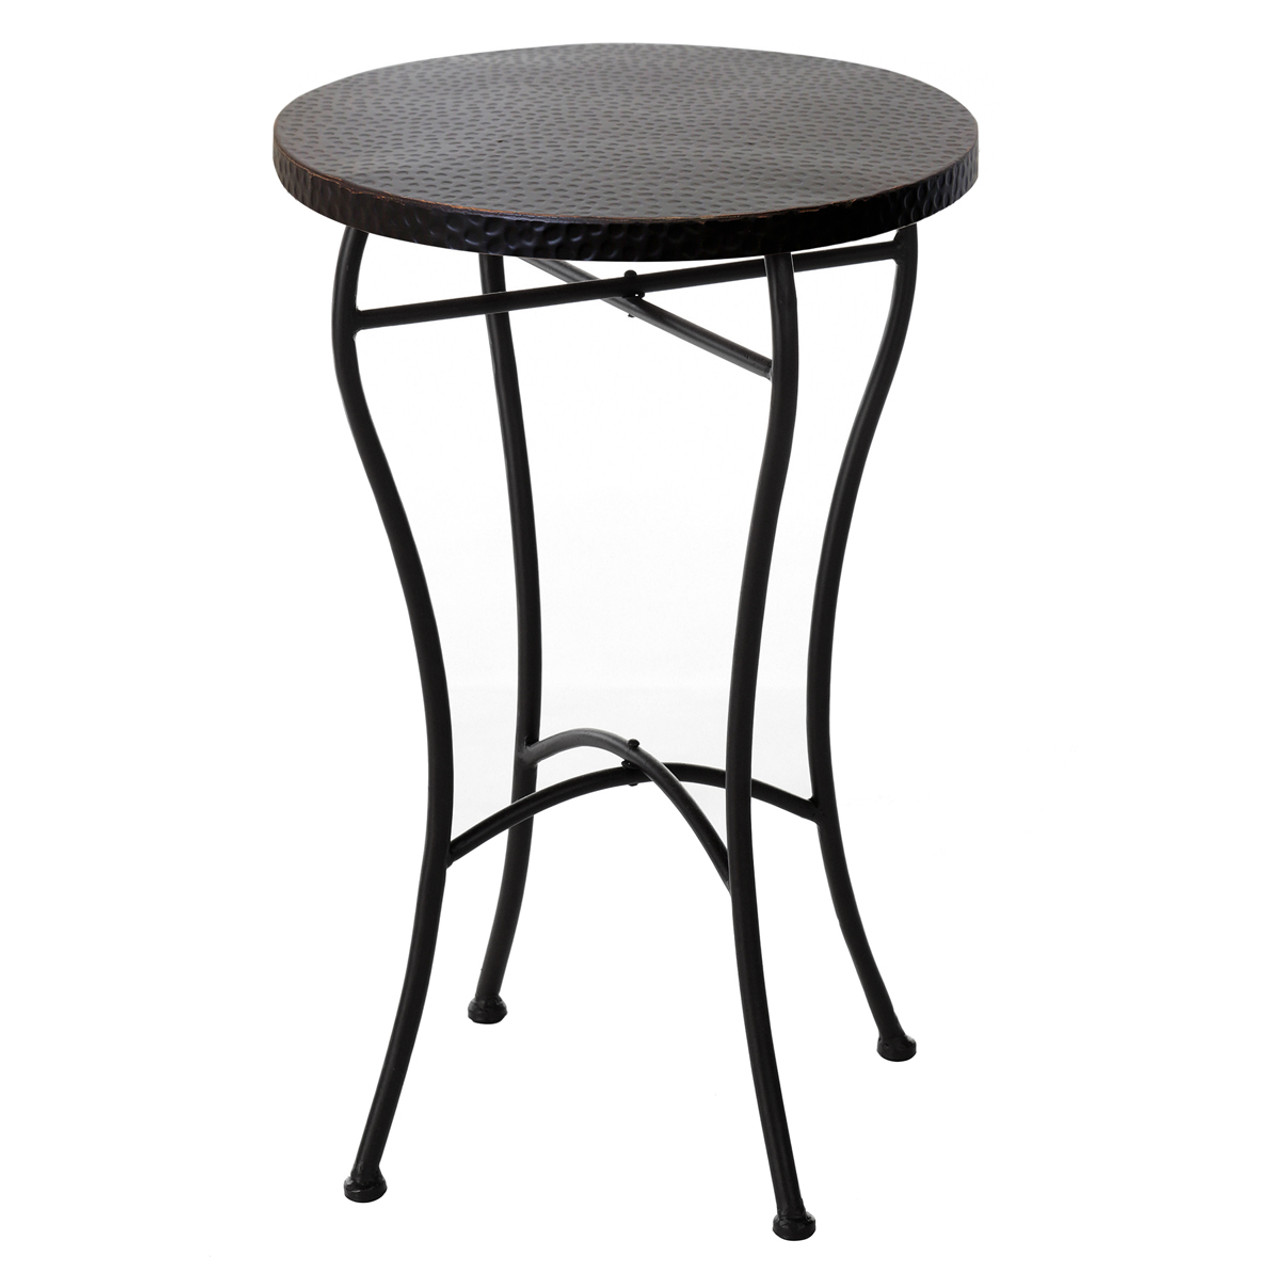 Round Hammered Metal Accent Table | Black Forest Decor